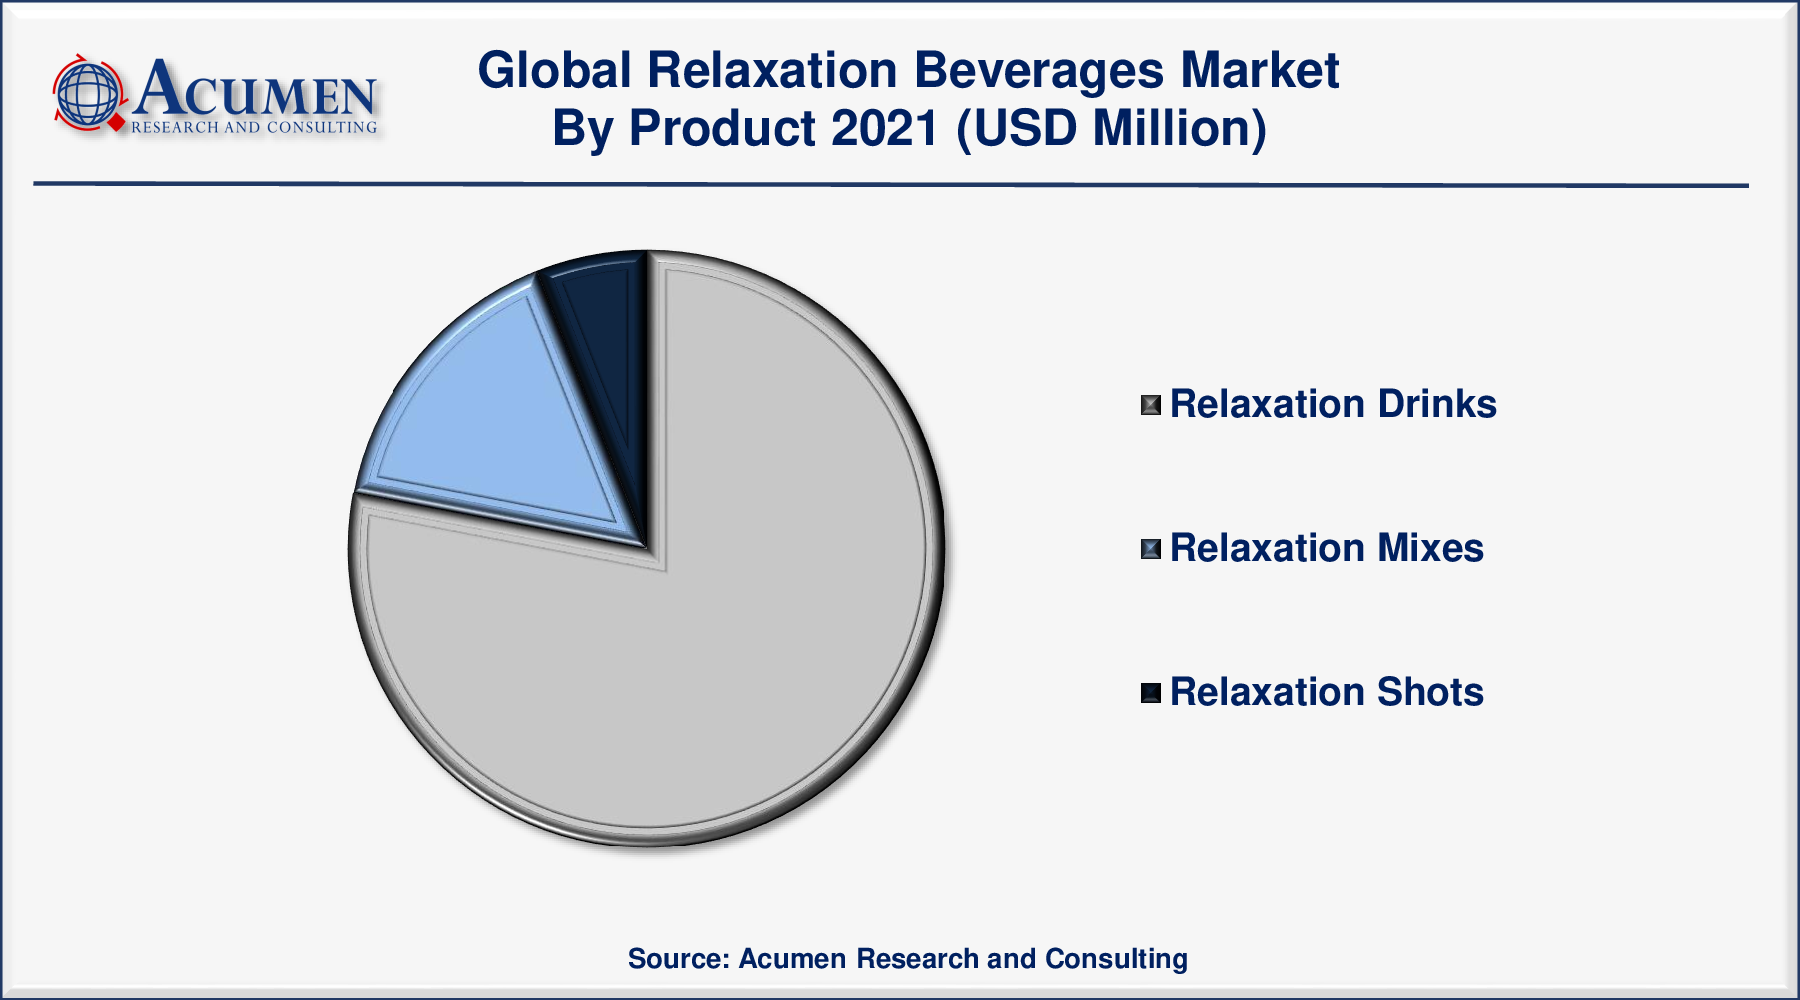 Relaxation Beverages Market Share was valued at USD 368 Million in 2021 and is predicted to be worth USD 1,271 Million by 2030, with a CAGR of 15.2% from 2022 to 2030.